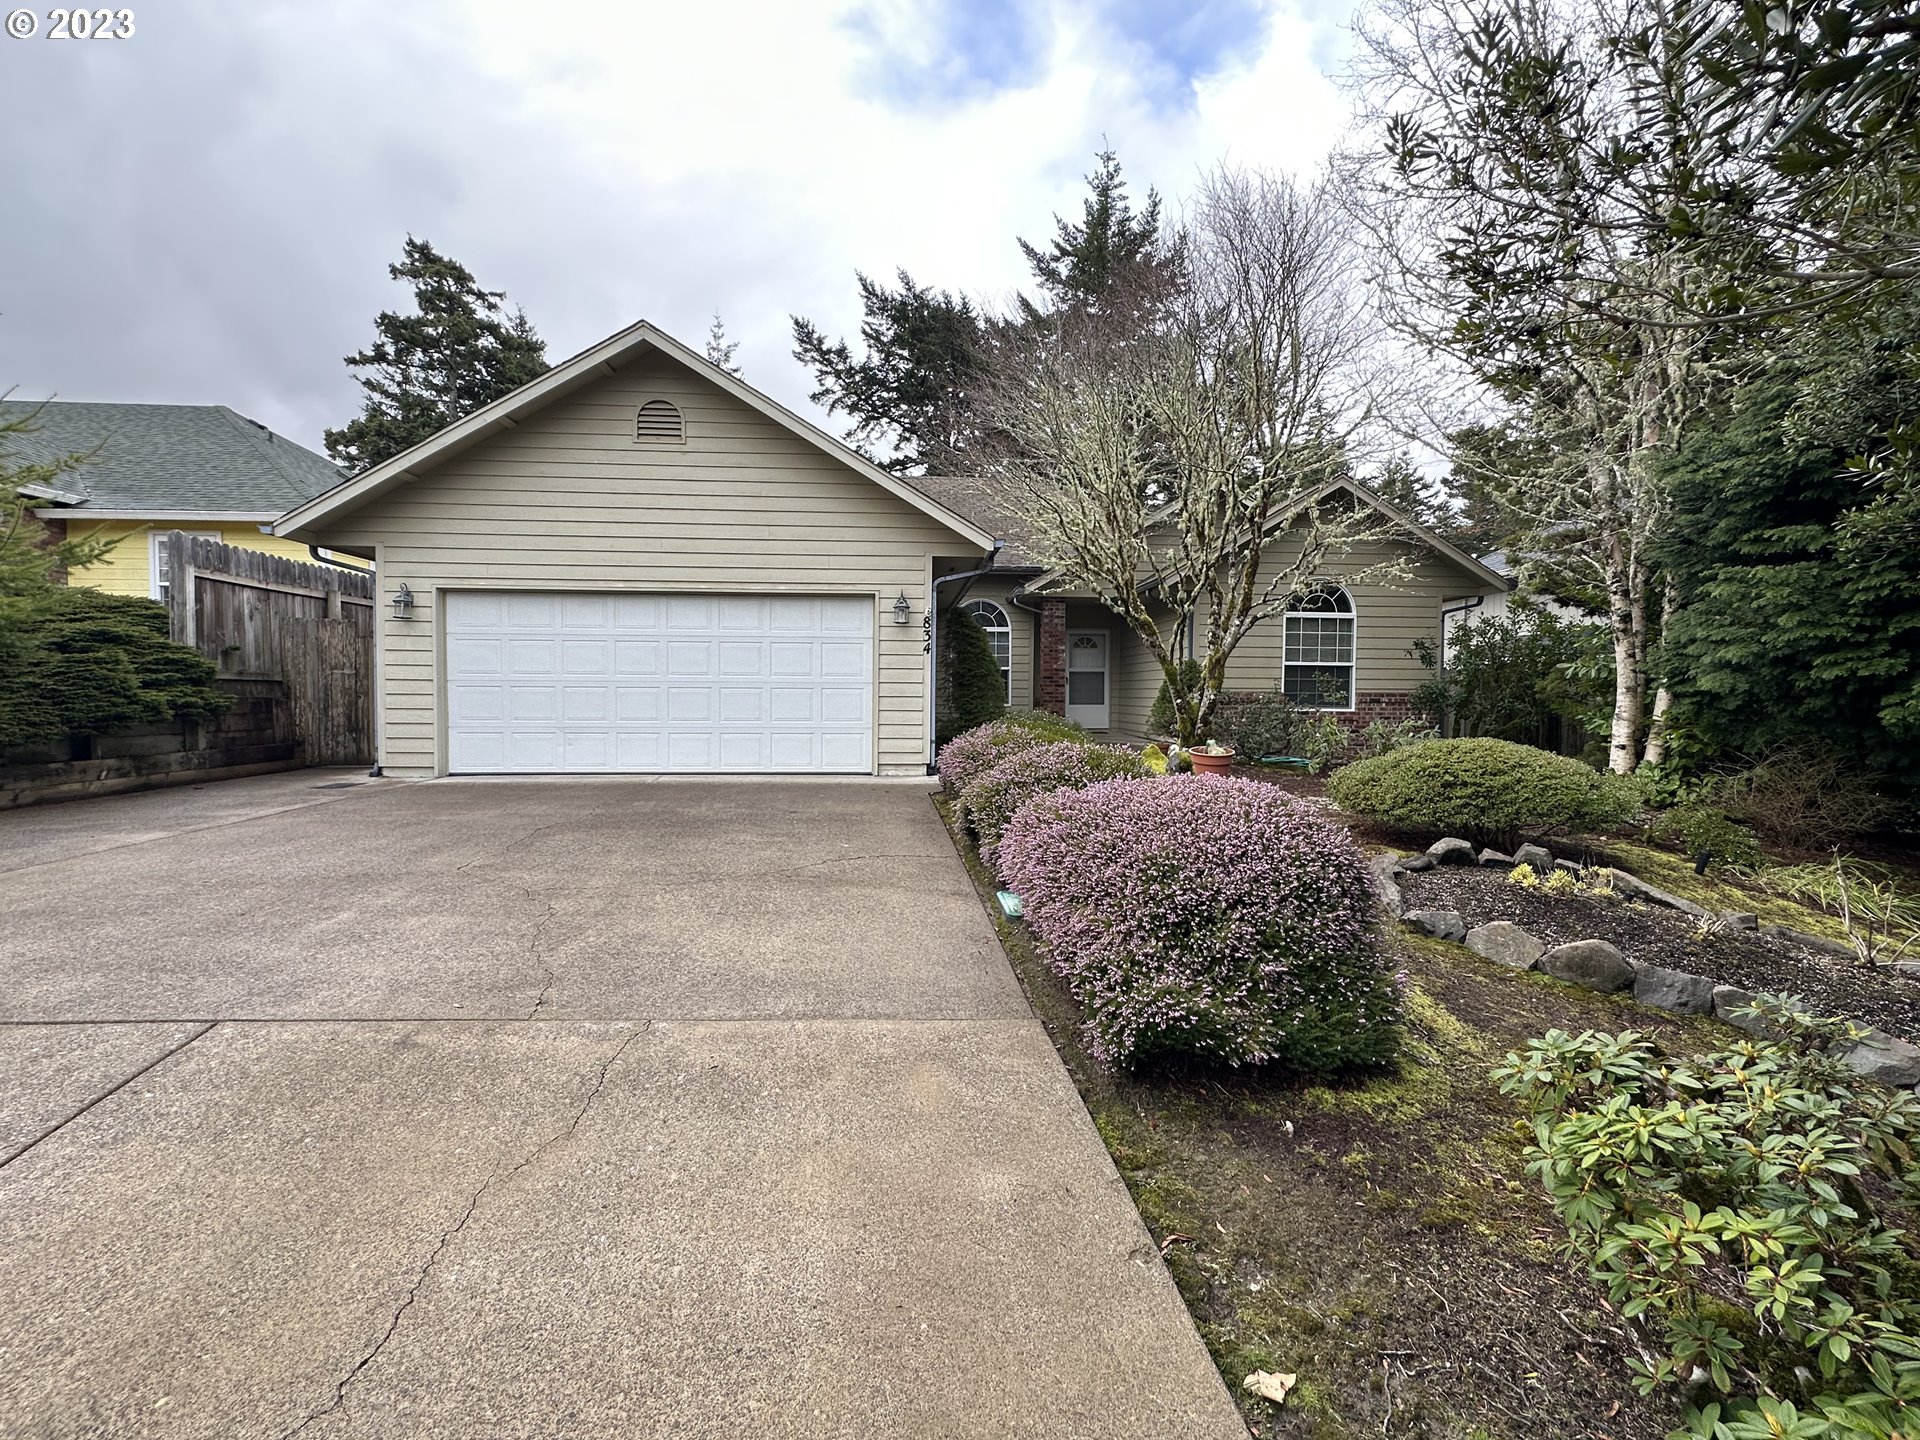 834 8TH ST, Florence, OR 97439